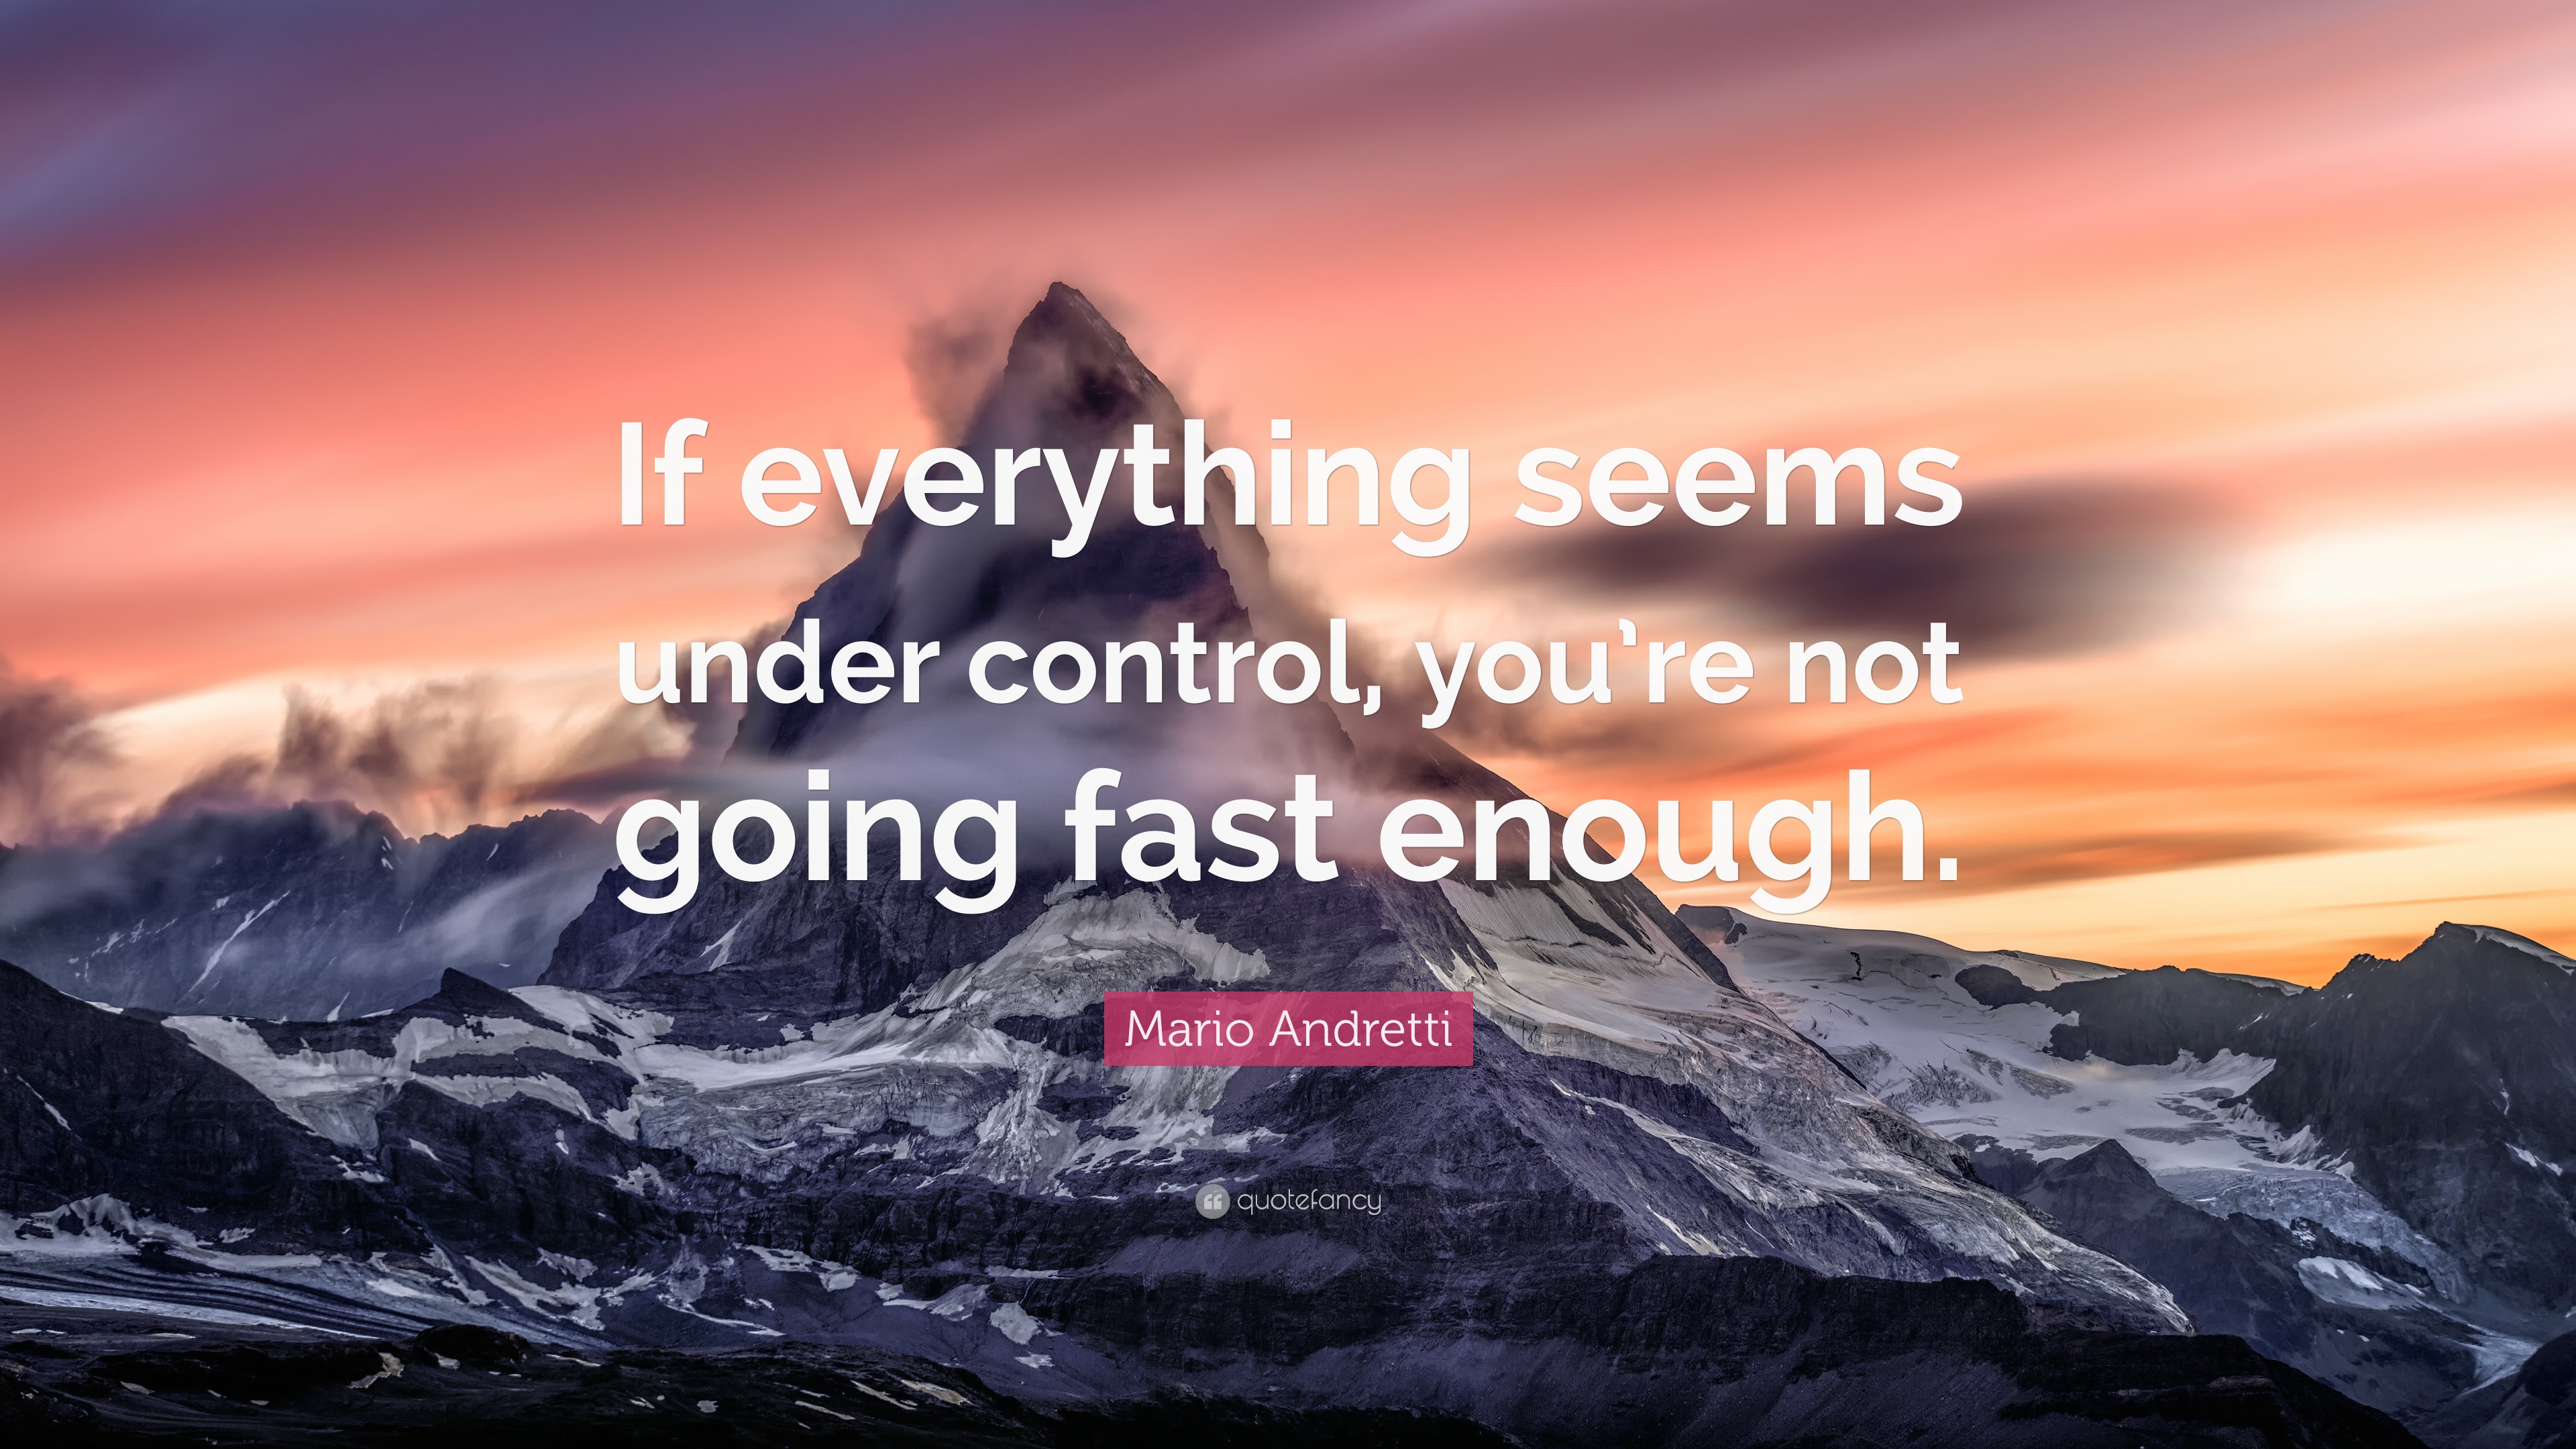 If everything seems under control, you're not going fast enough